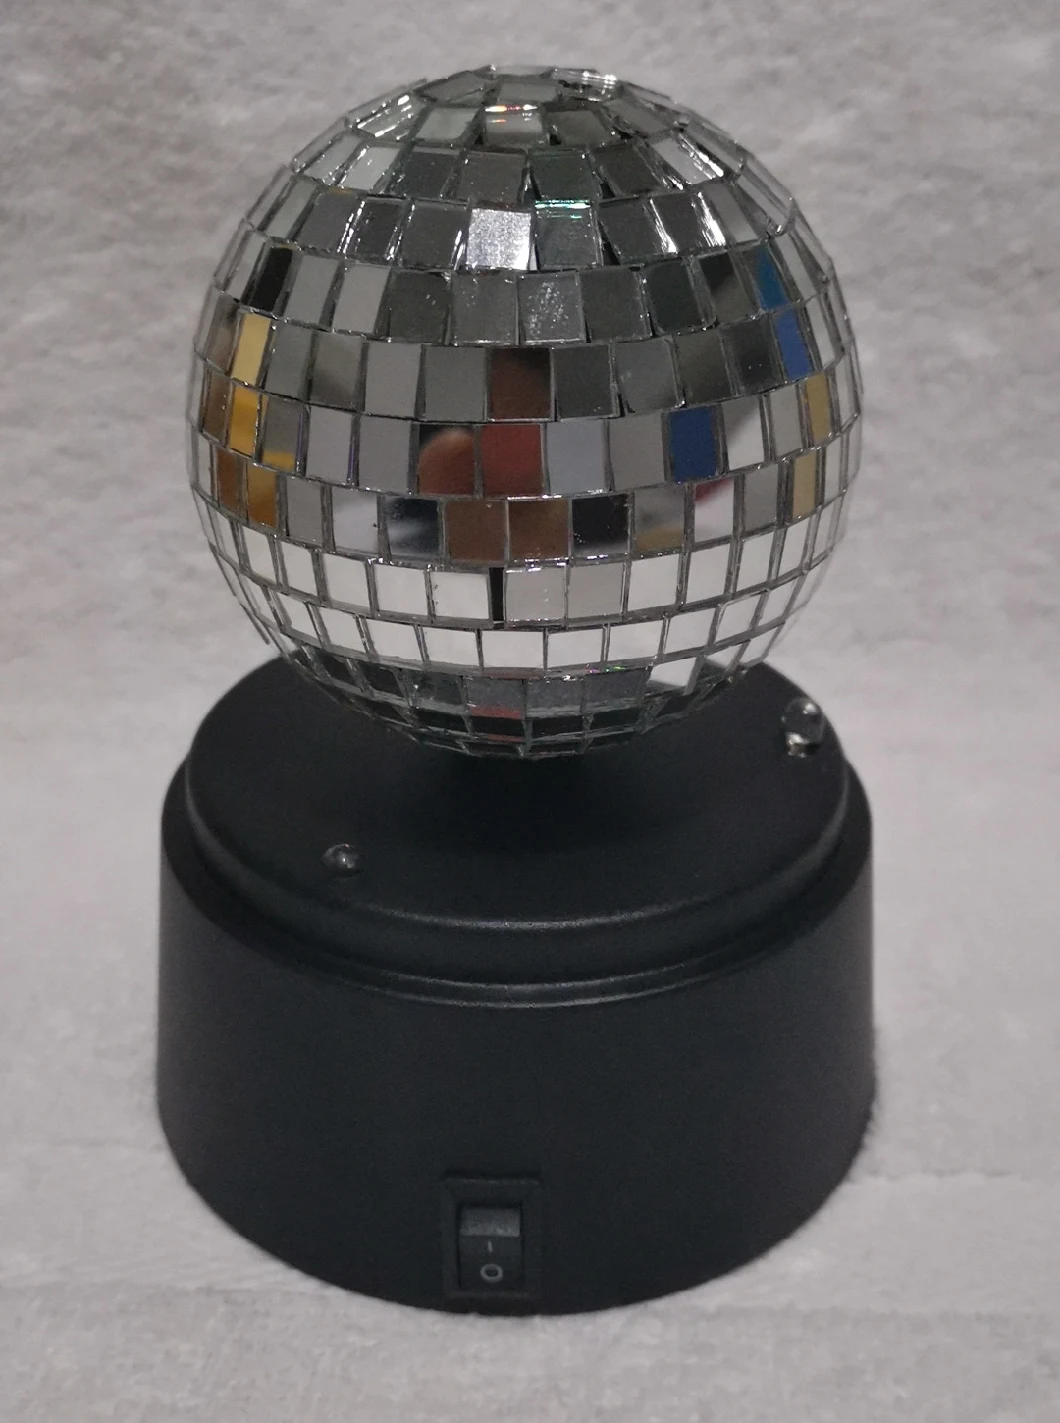 Mirror Ball Party Disco Ball Irradiancy & Running Table Lamp Arts & Crafts Light